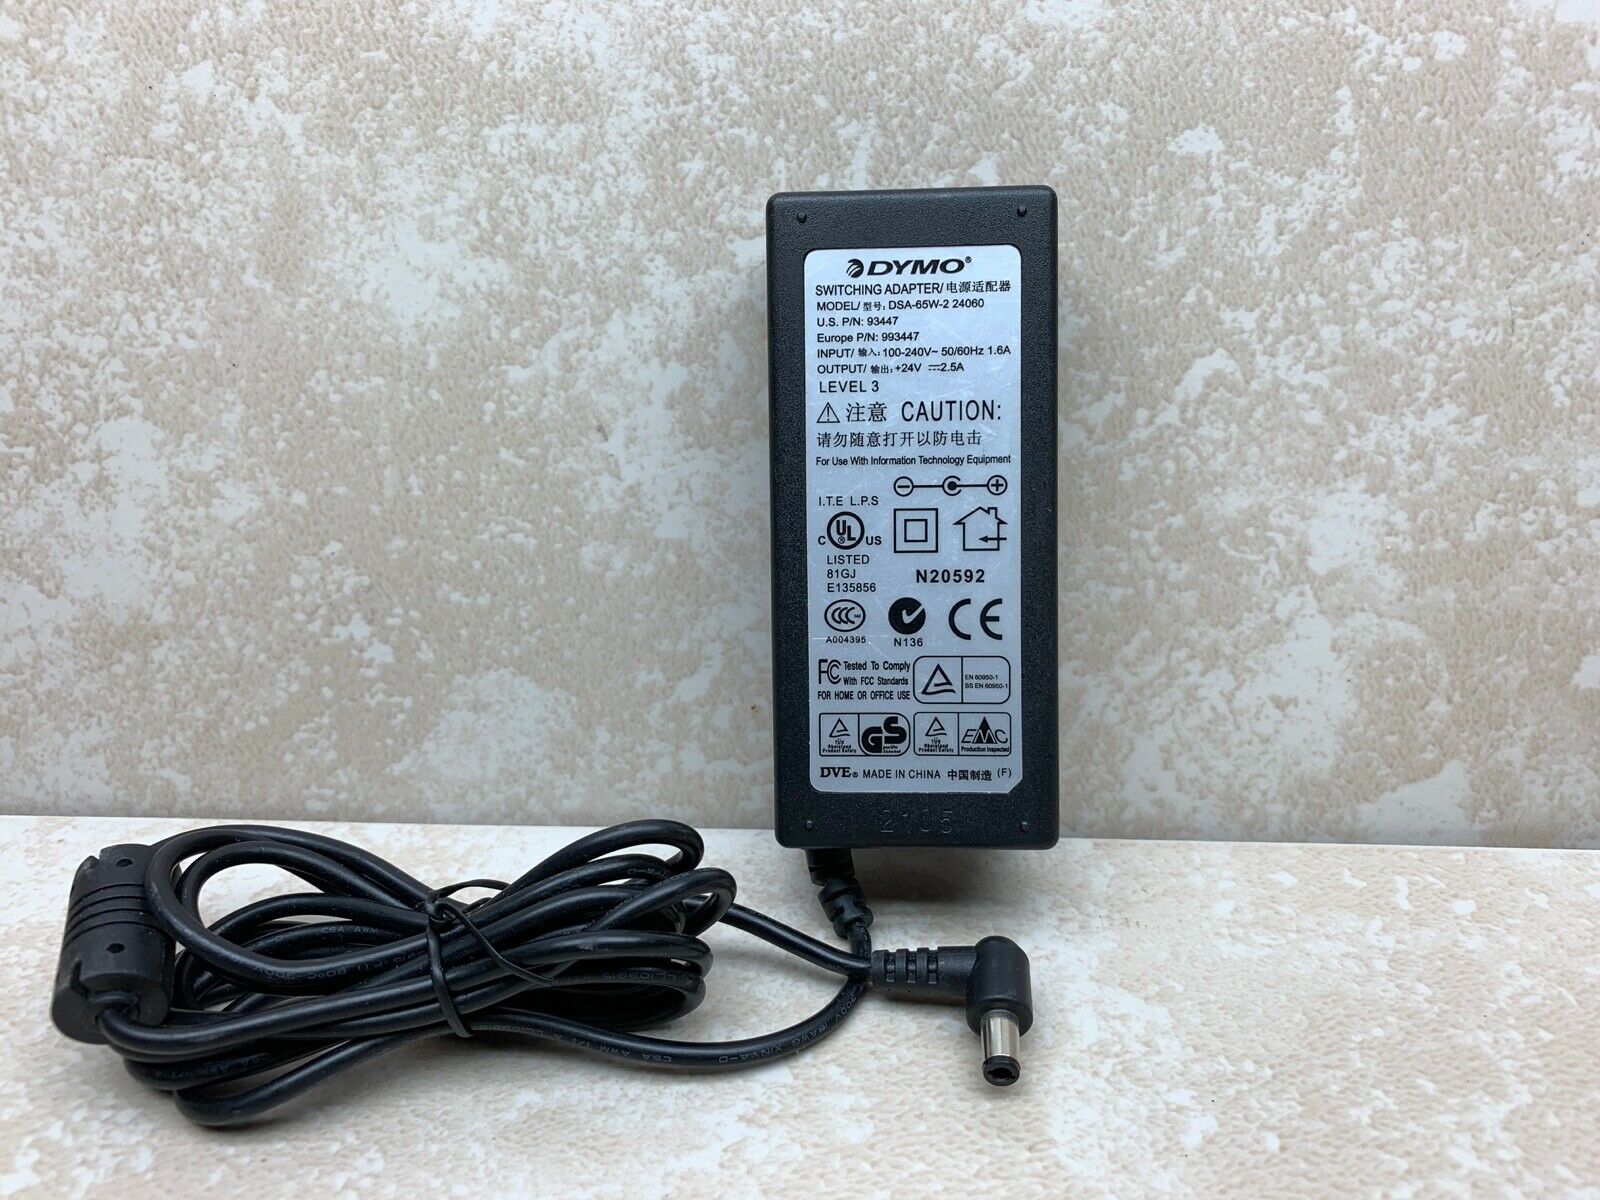 NEW 24v 2.5A DSA-65W-2 24060 AC ADAPTER FOR Dymo LabelWriter Thermal Printer OEM Power Supply